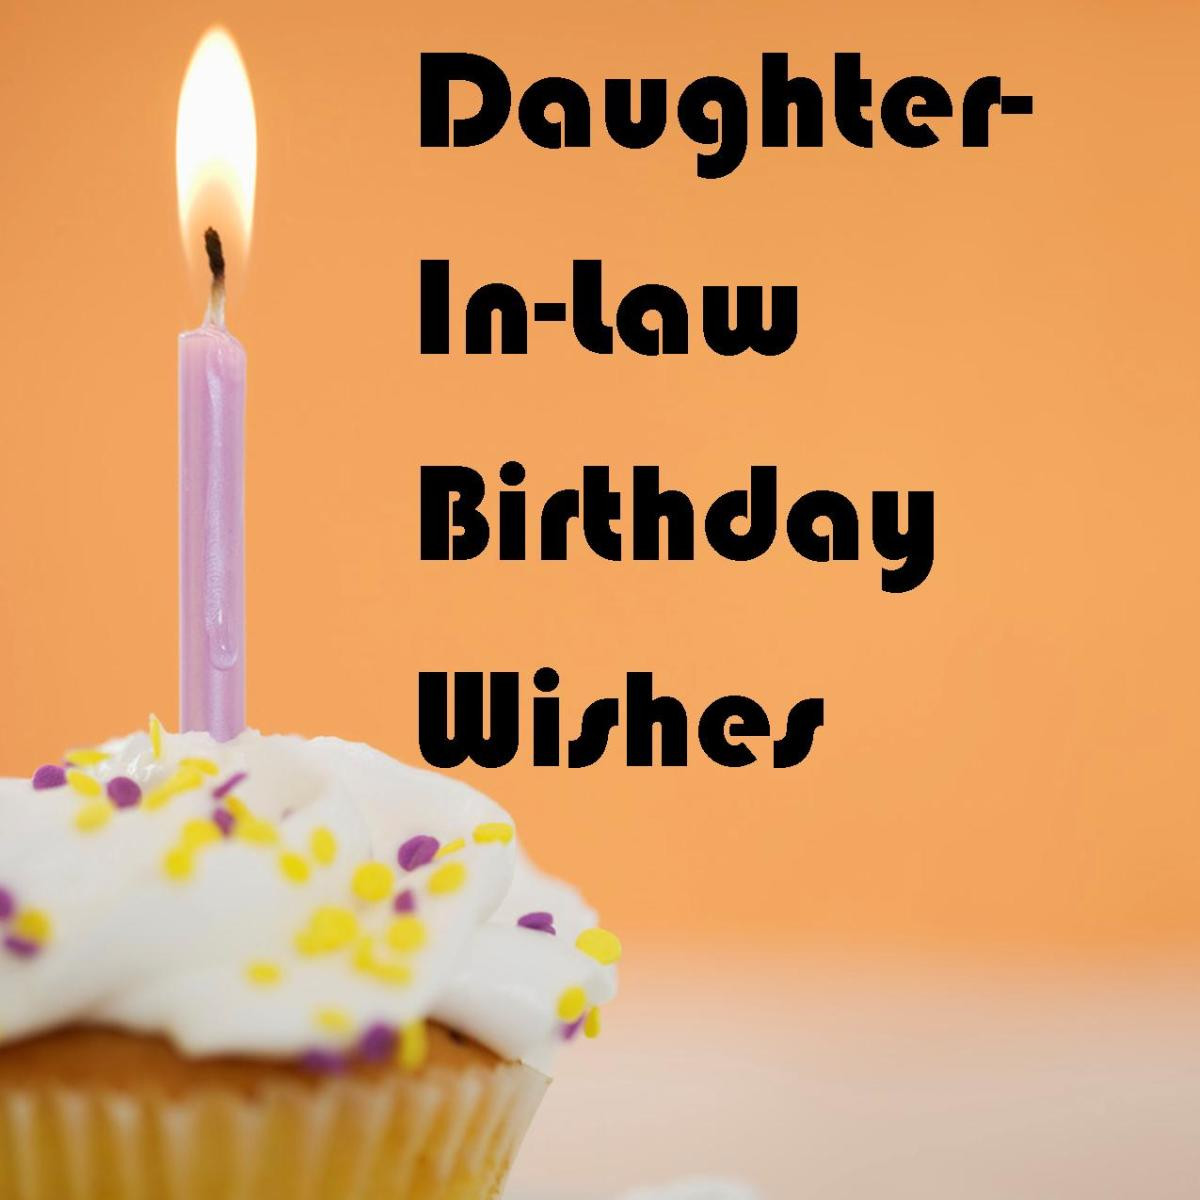 Birthday Wishes To Daughter In Law
 Daughter in Law Birthday Wishes What to Write in Her Card